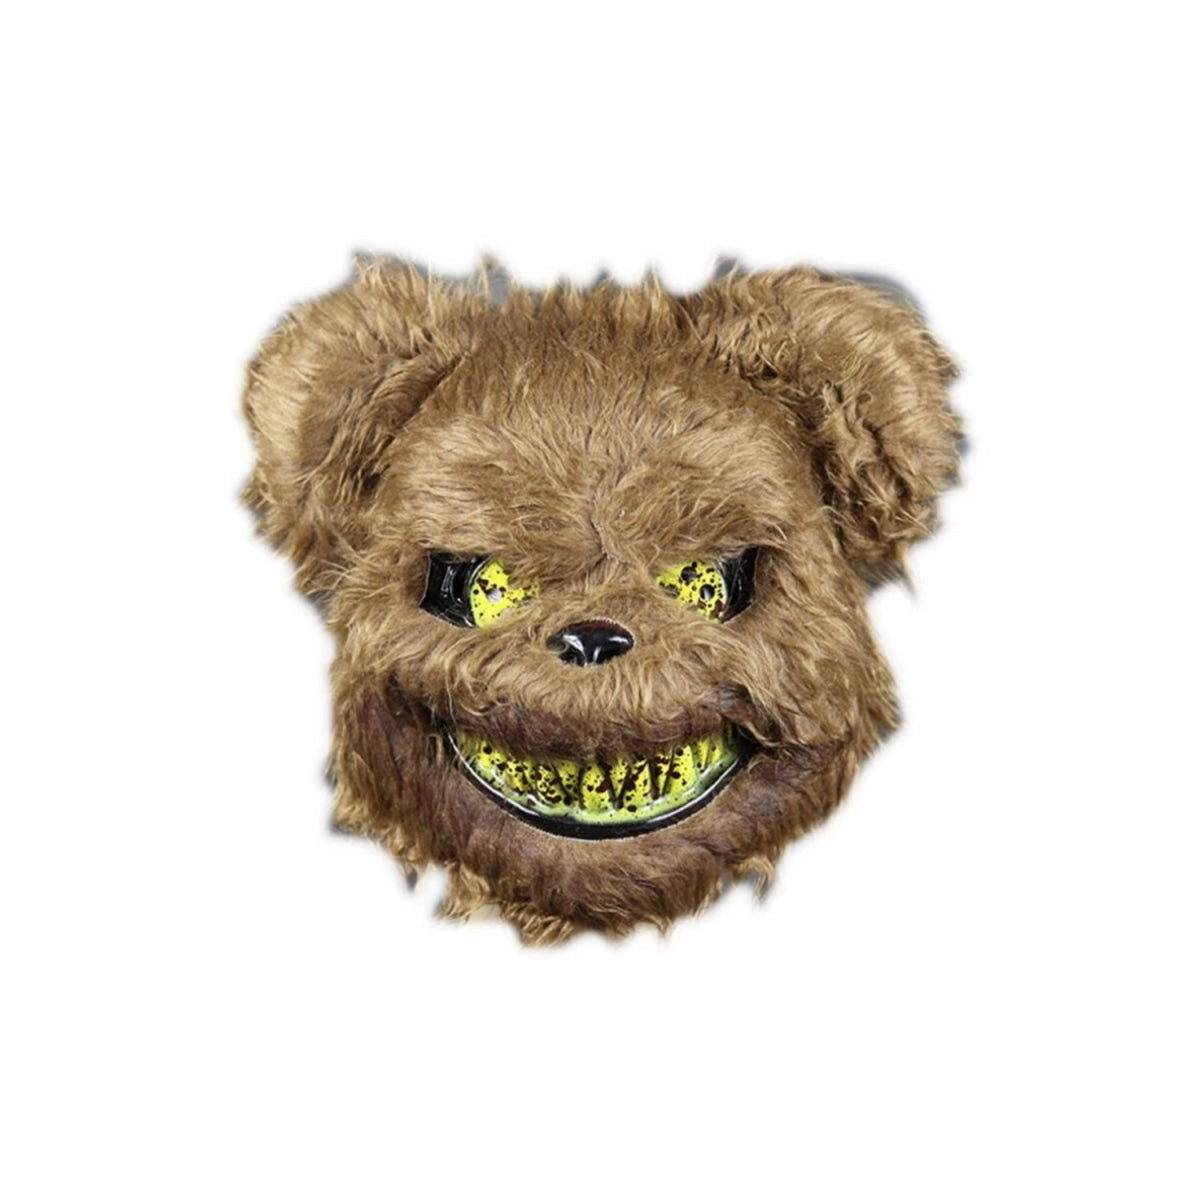 Creepy Bear Mask Halloween Prop With Fur And Elastic Belt Fits Adult Child